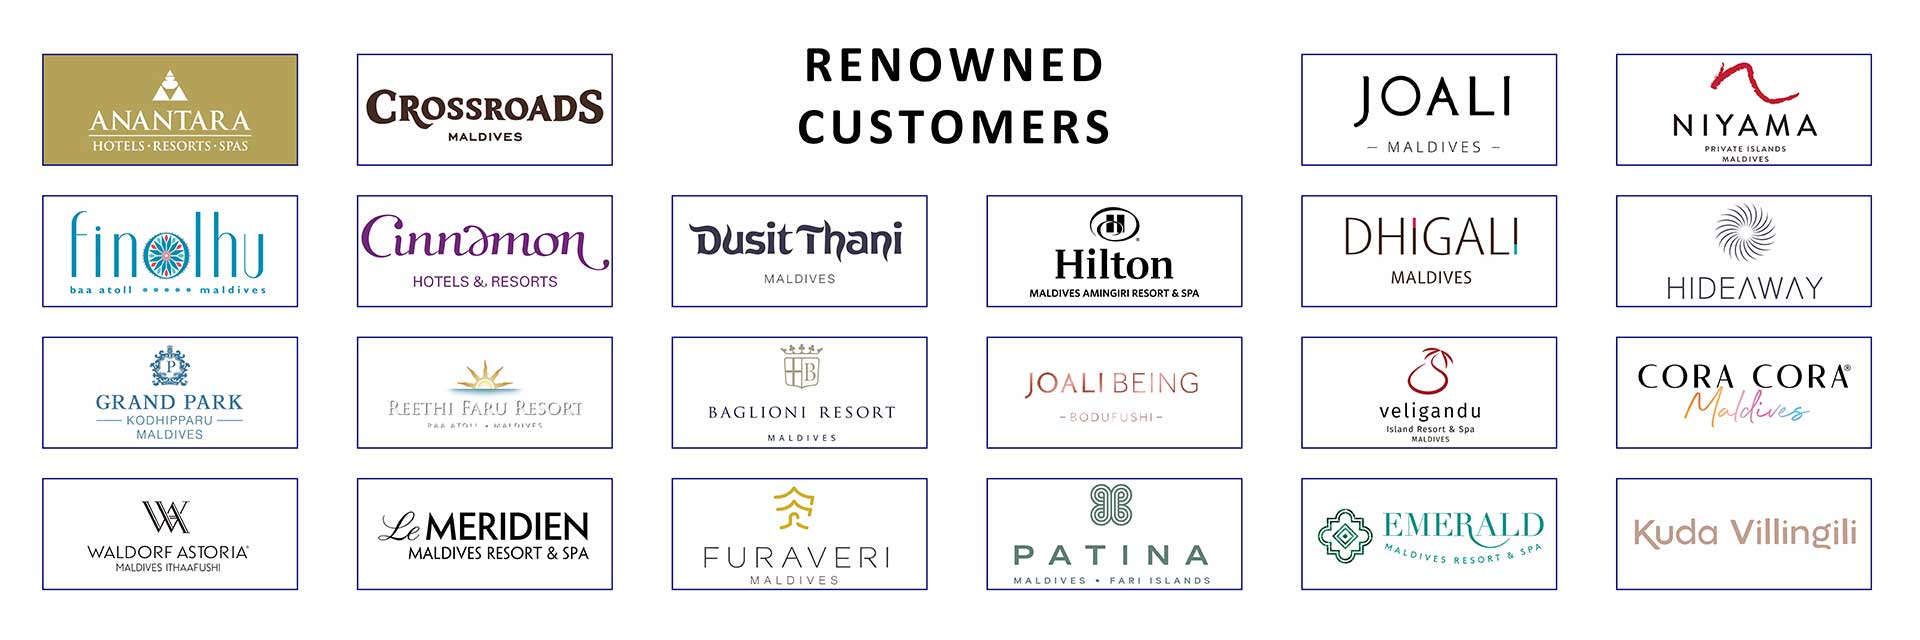 RENOWNED-CLIENTS